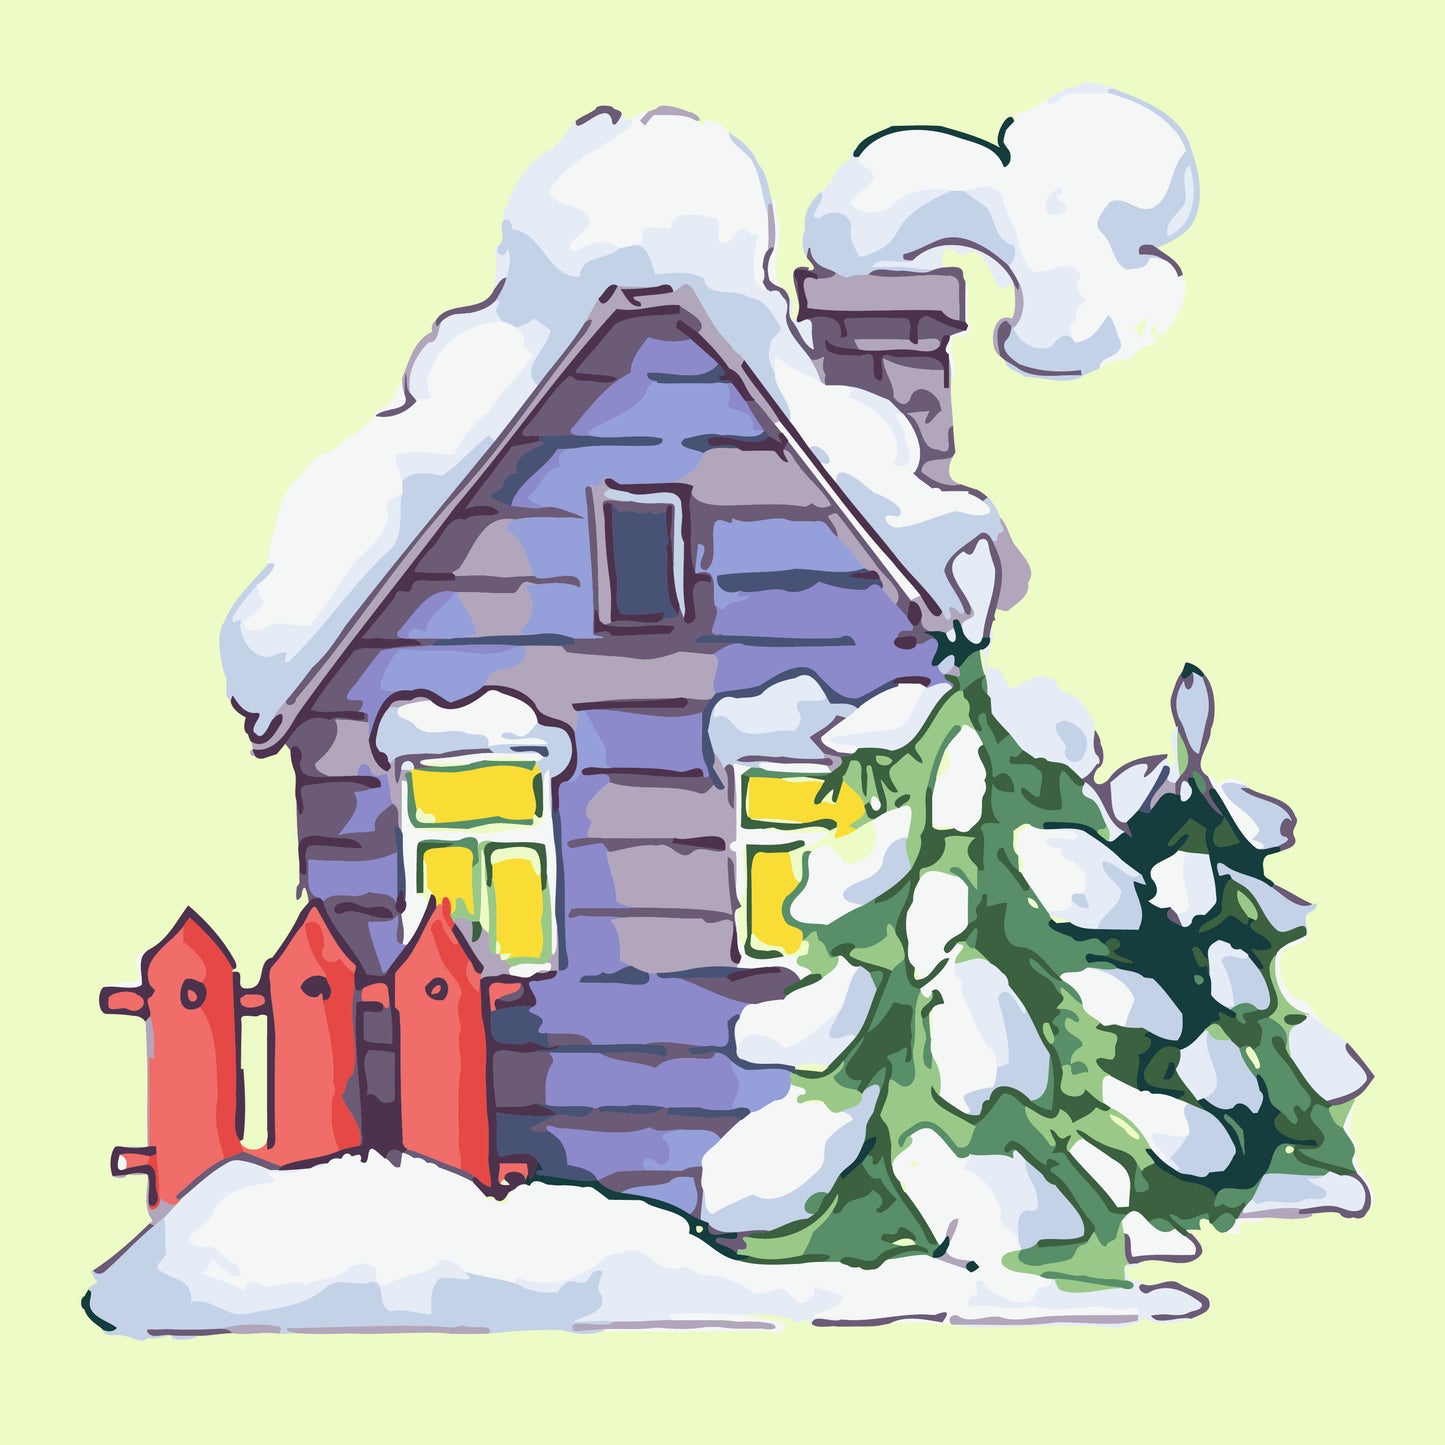 Snowy House - Mini Paint by Numbers Kit